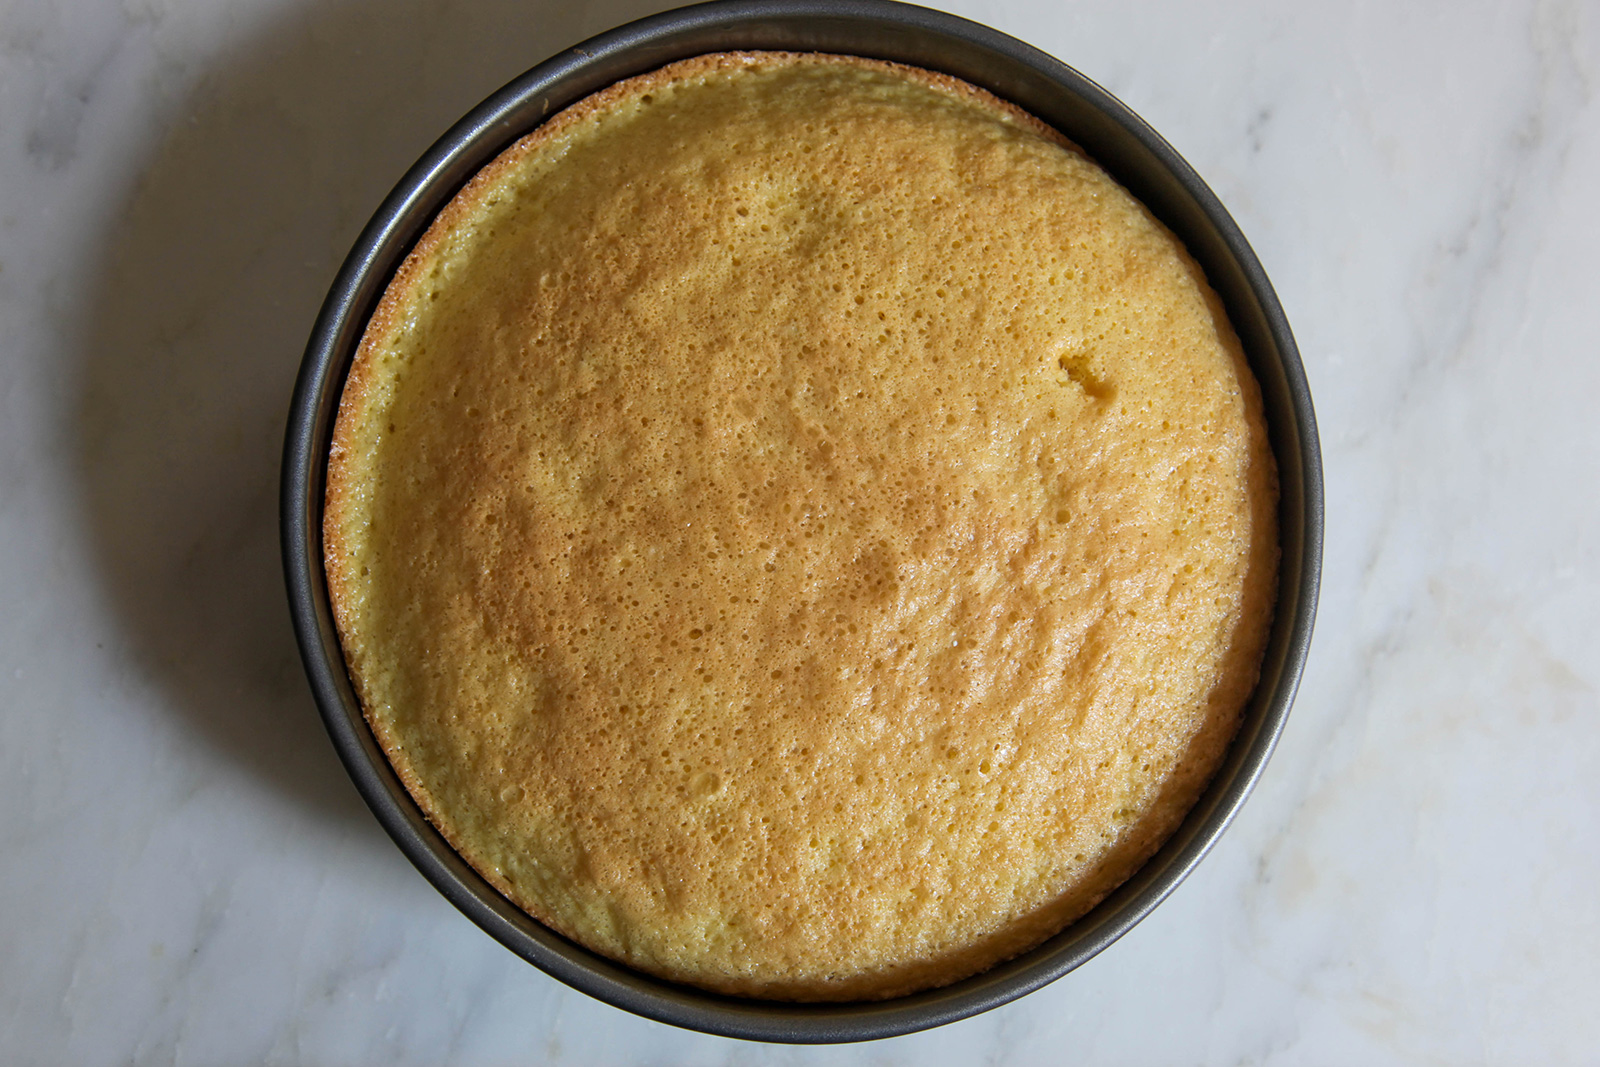 Baked cake in pan, ready to remove and cool, in prep for strawberry cake